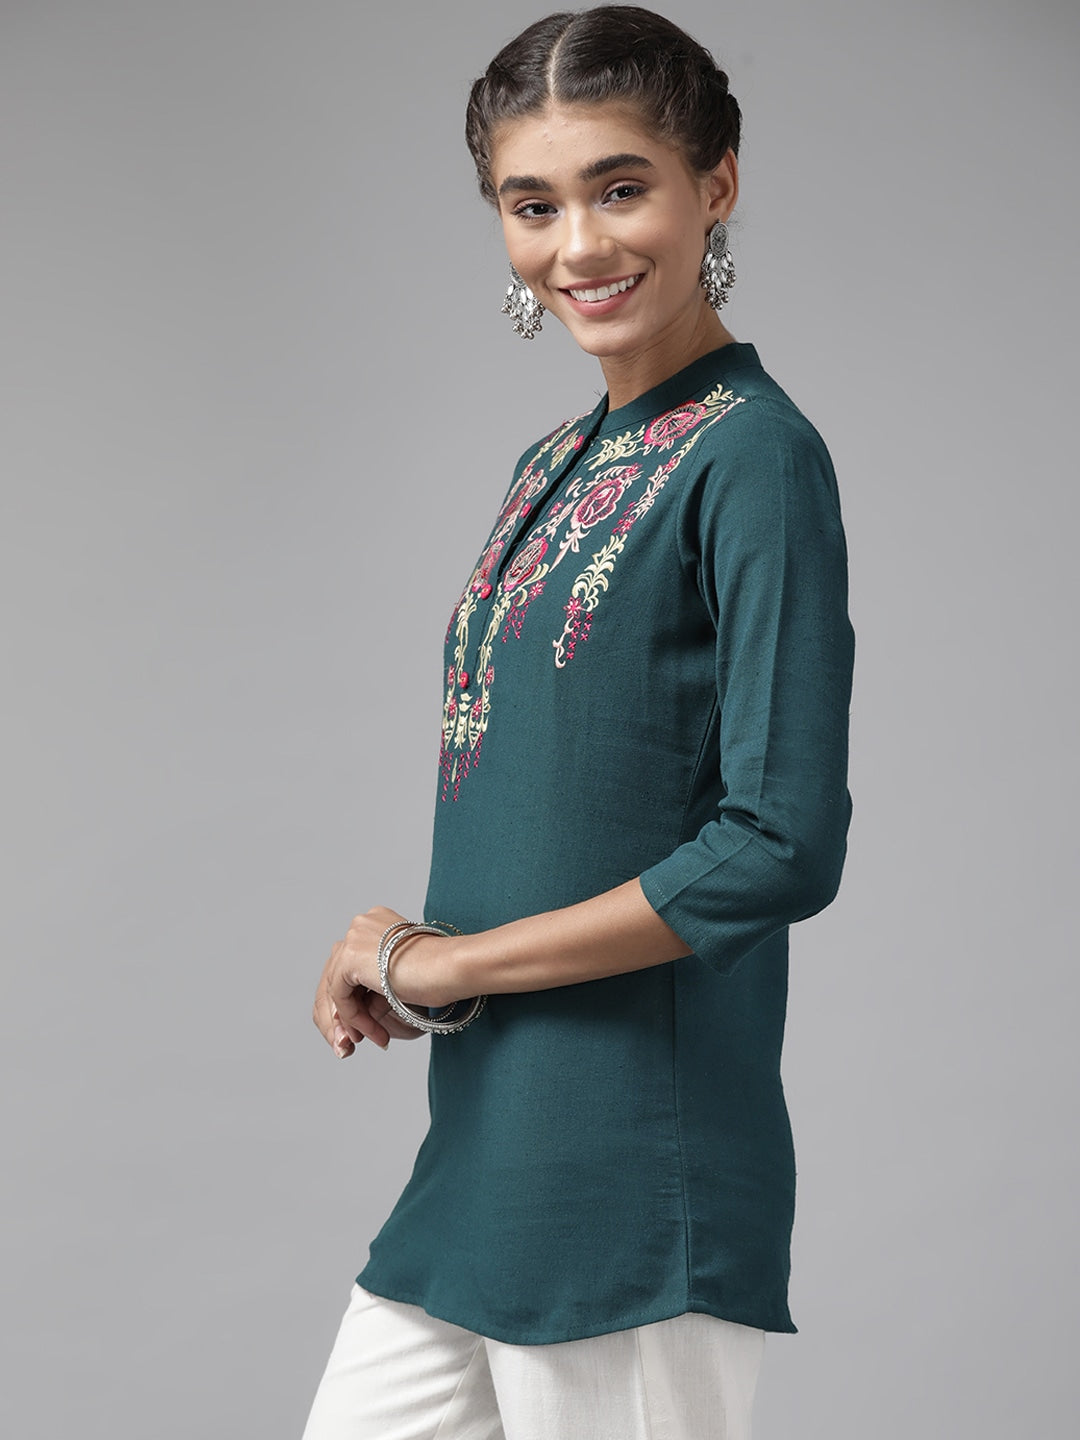 Teal Floral Embroidered  Top Yufta Store